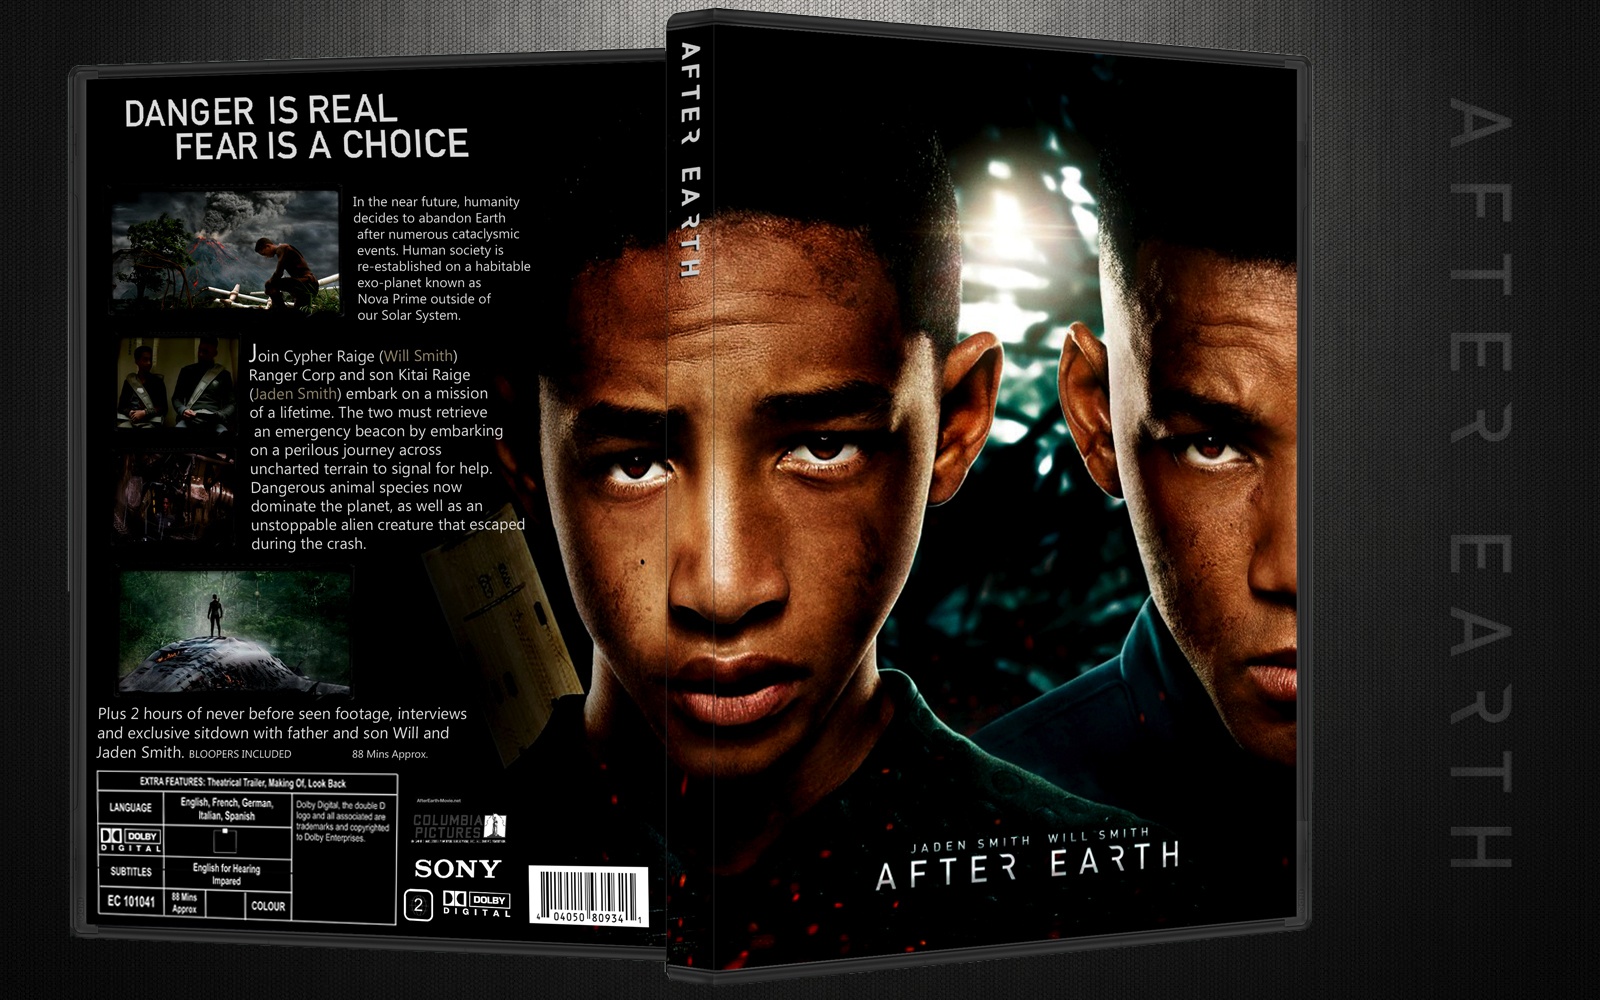 After Earth box cover